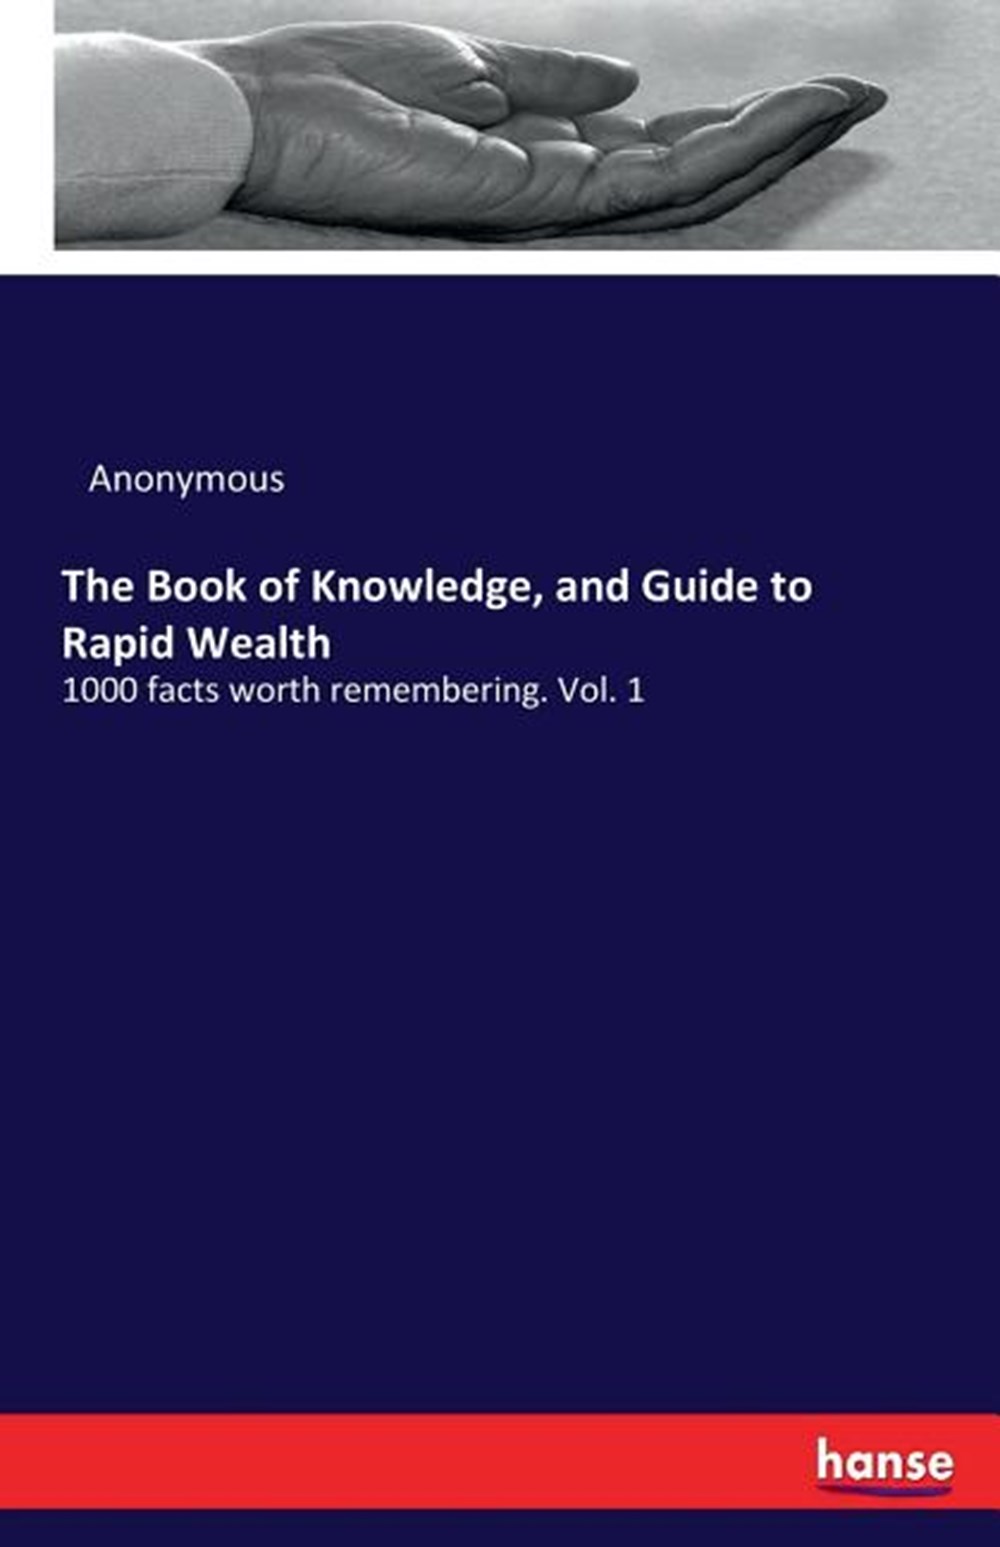 Book of Knowledge, and Guide to Rapid Wealth 1000 facts worth remembering. Vol. 1